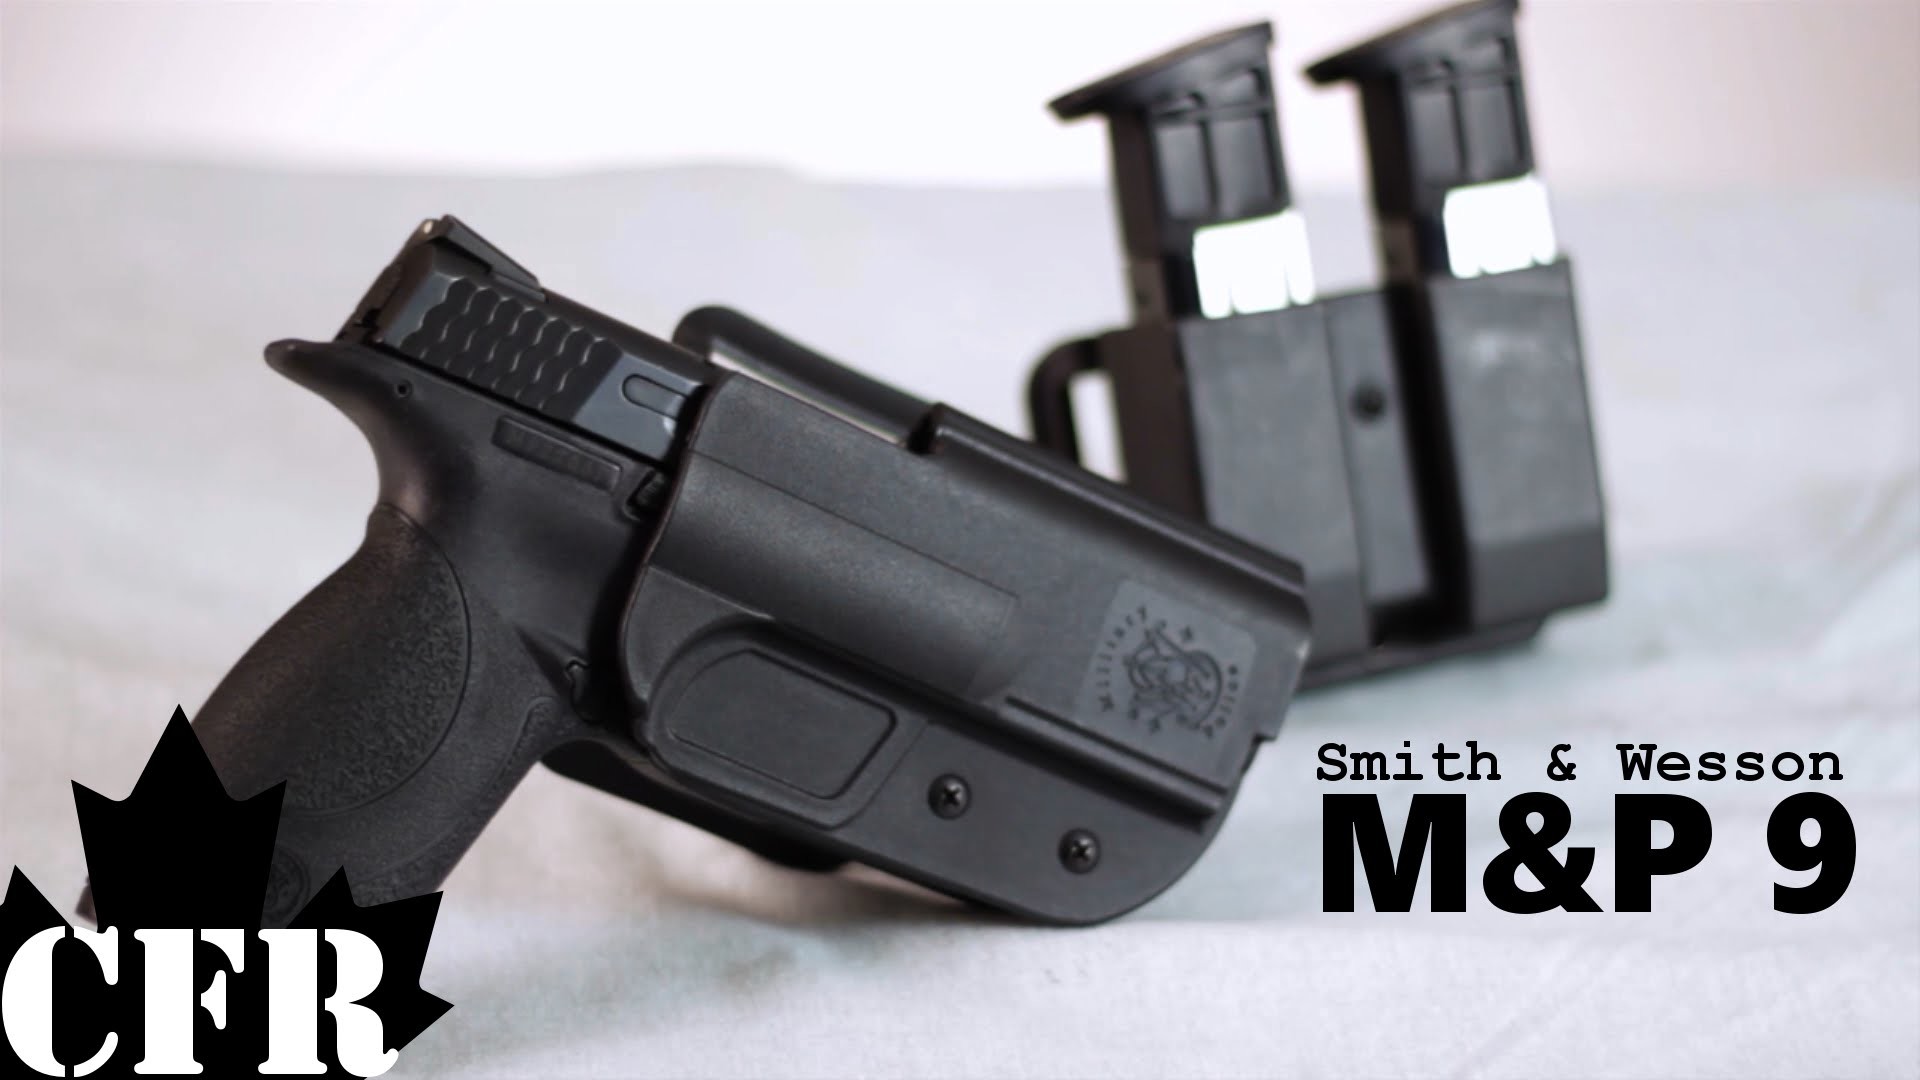 Smith & Wesson M&P 9mm Review